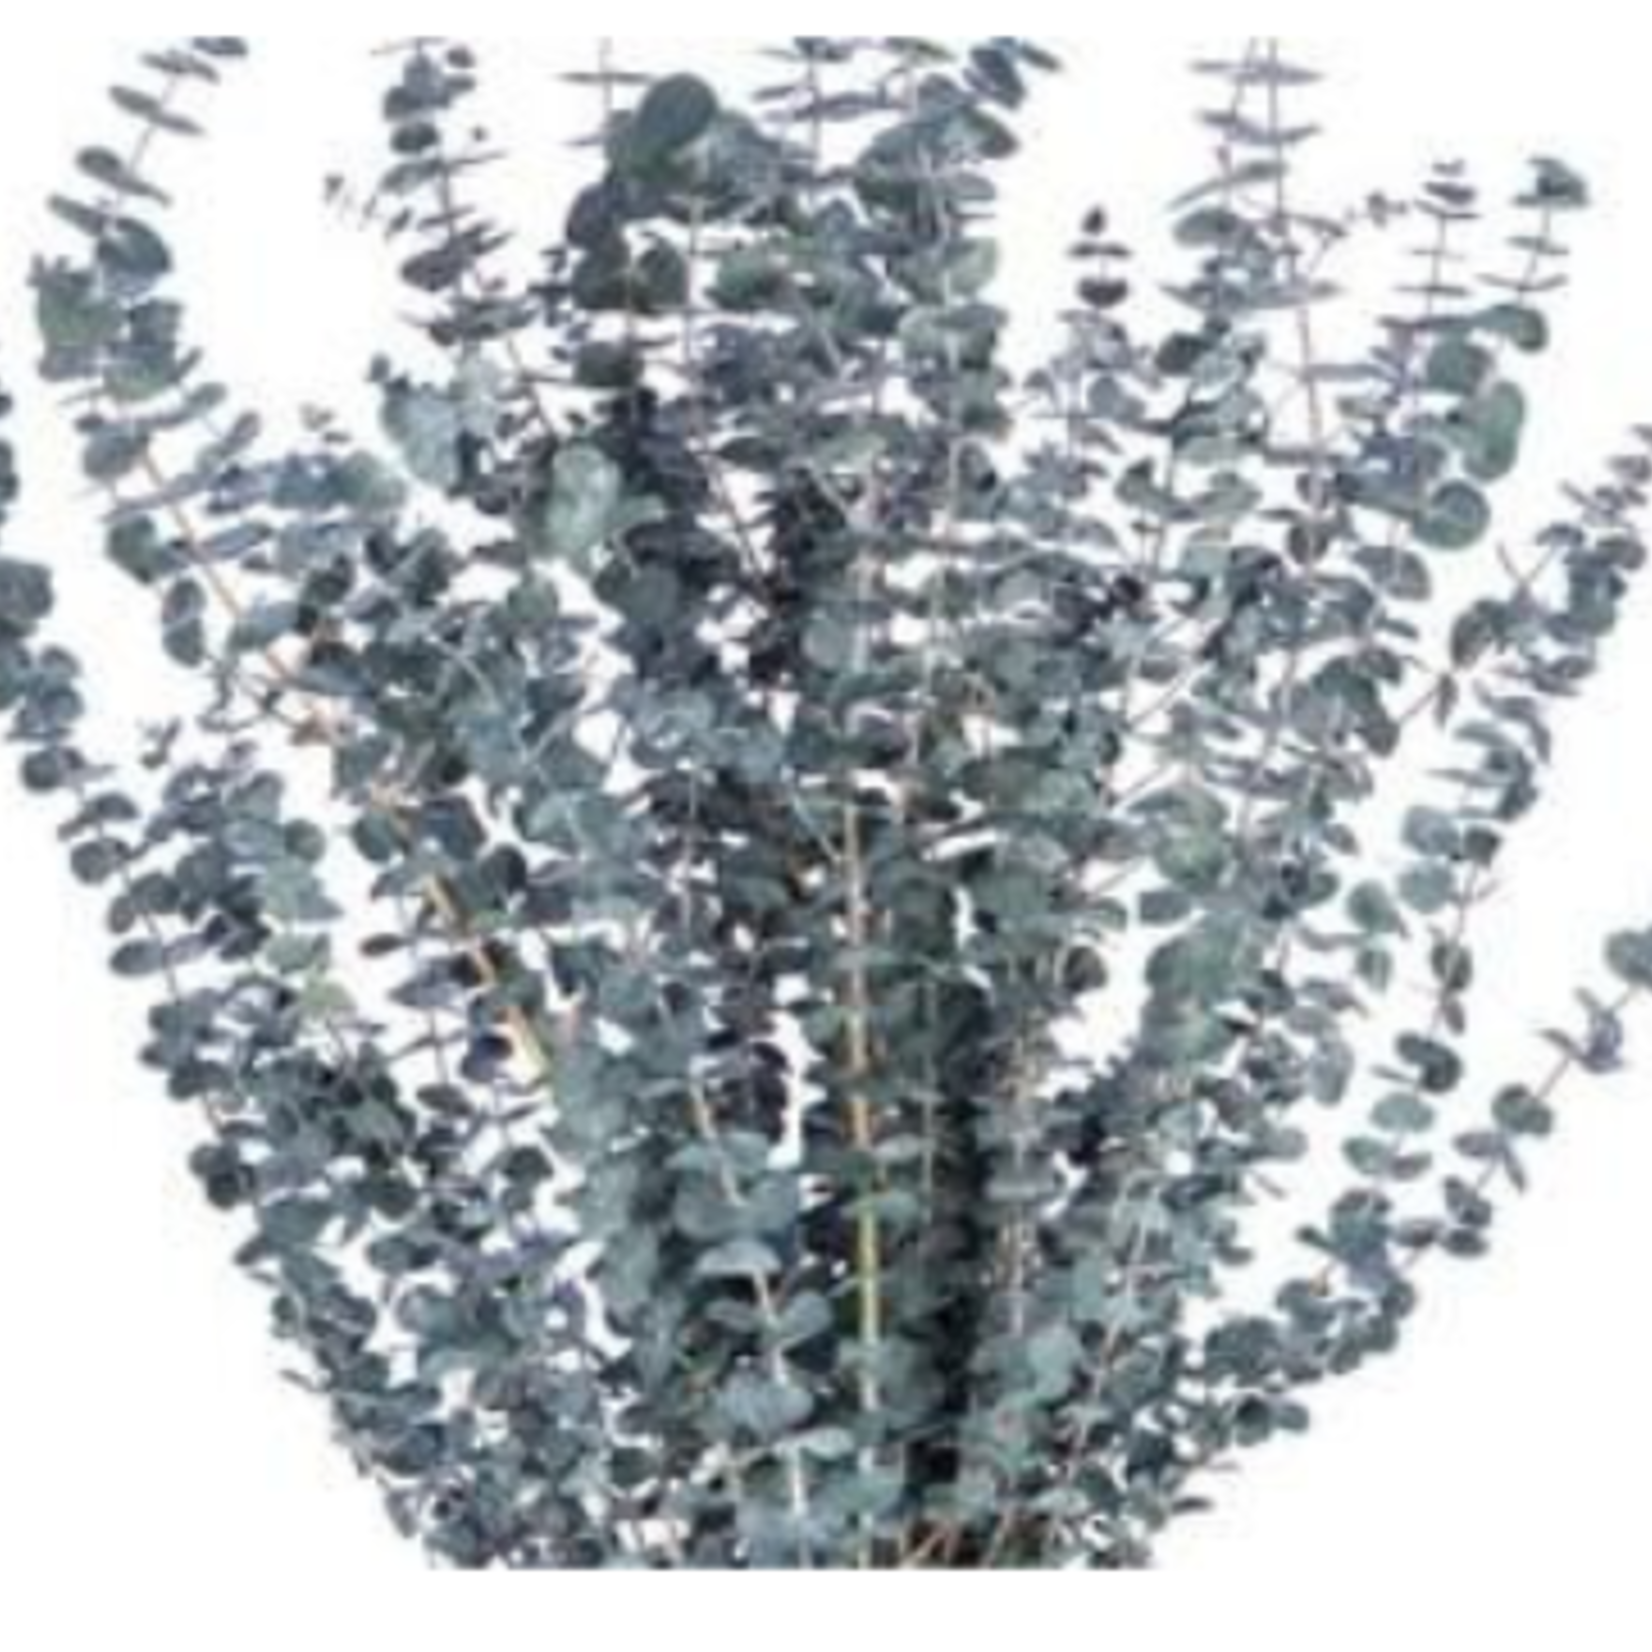 BLUE PRESERVED FROSTED EUCALYPTUS 1lbs (approximately 30” and 25 stems”, reg $24.99